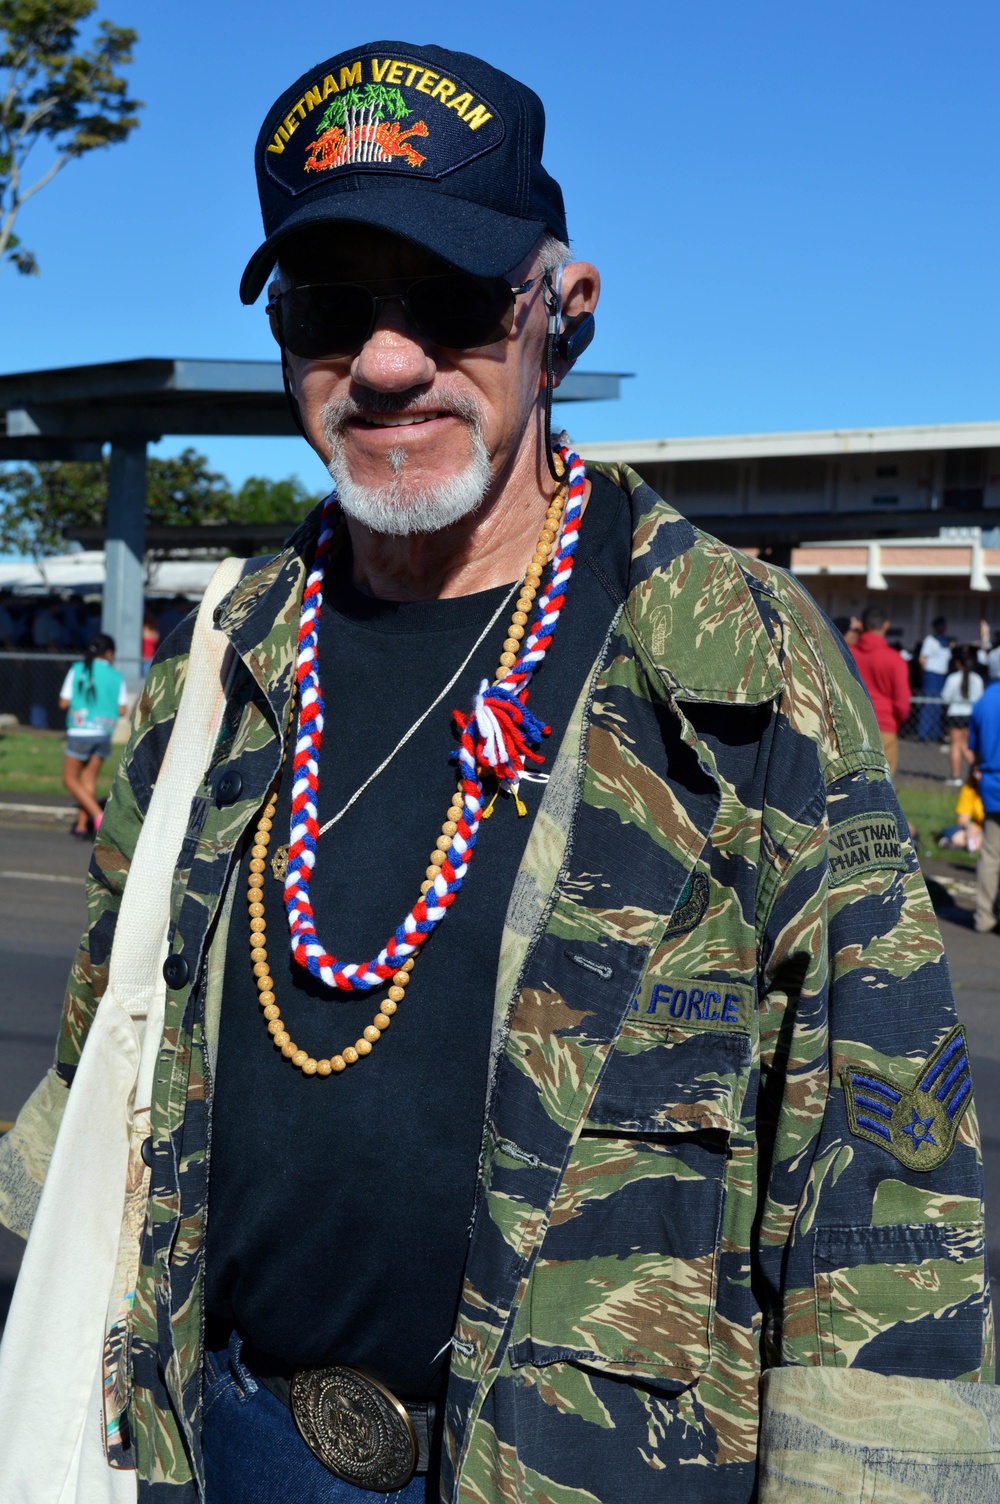 Hawaii celebrates, honors vets during state's oldest Veterans Day parade